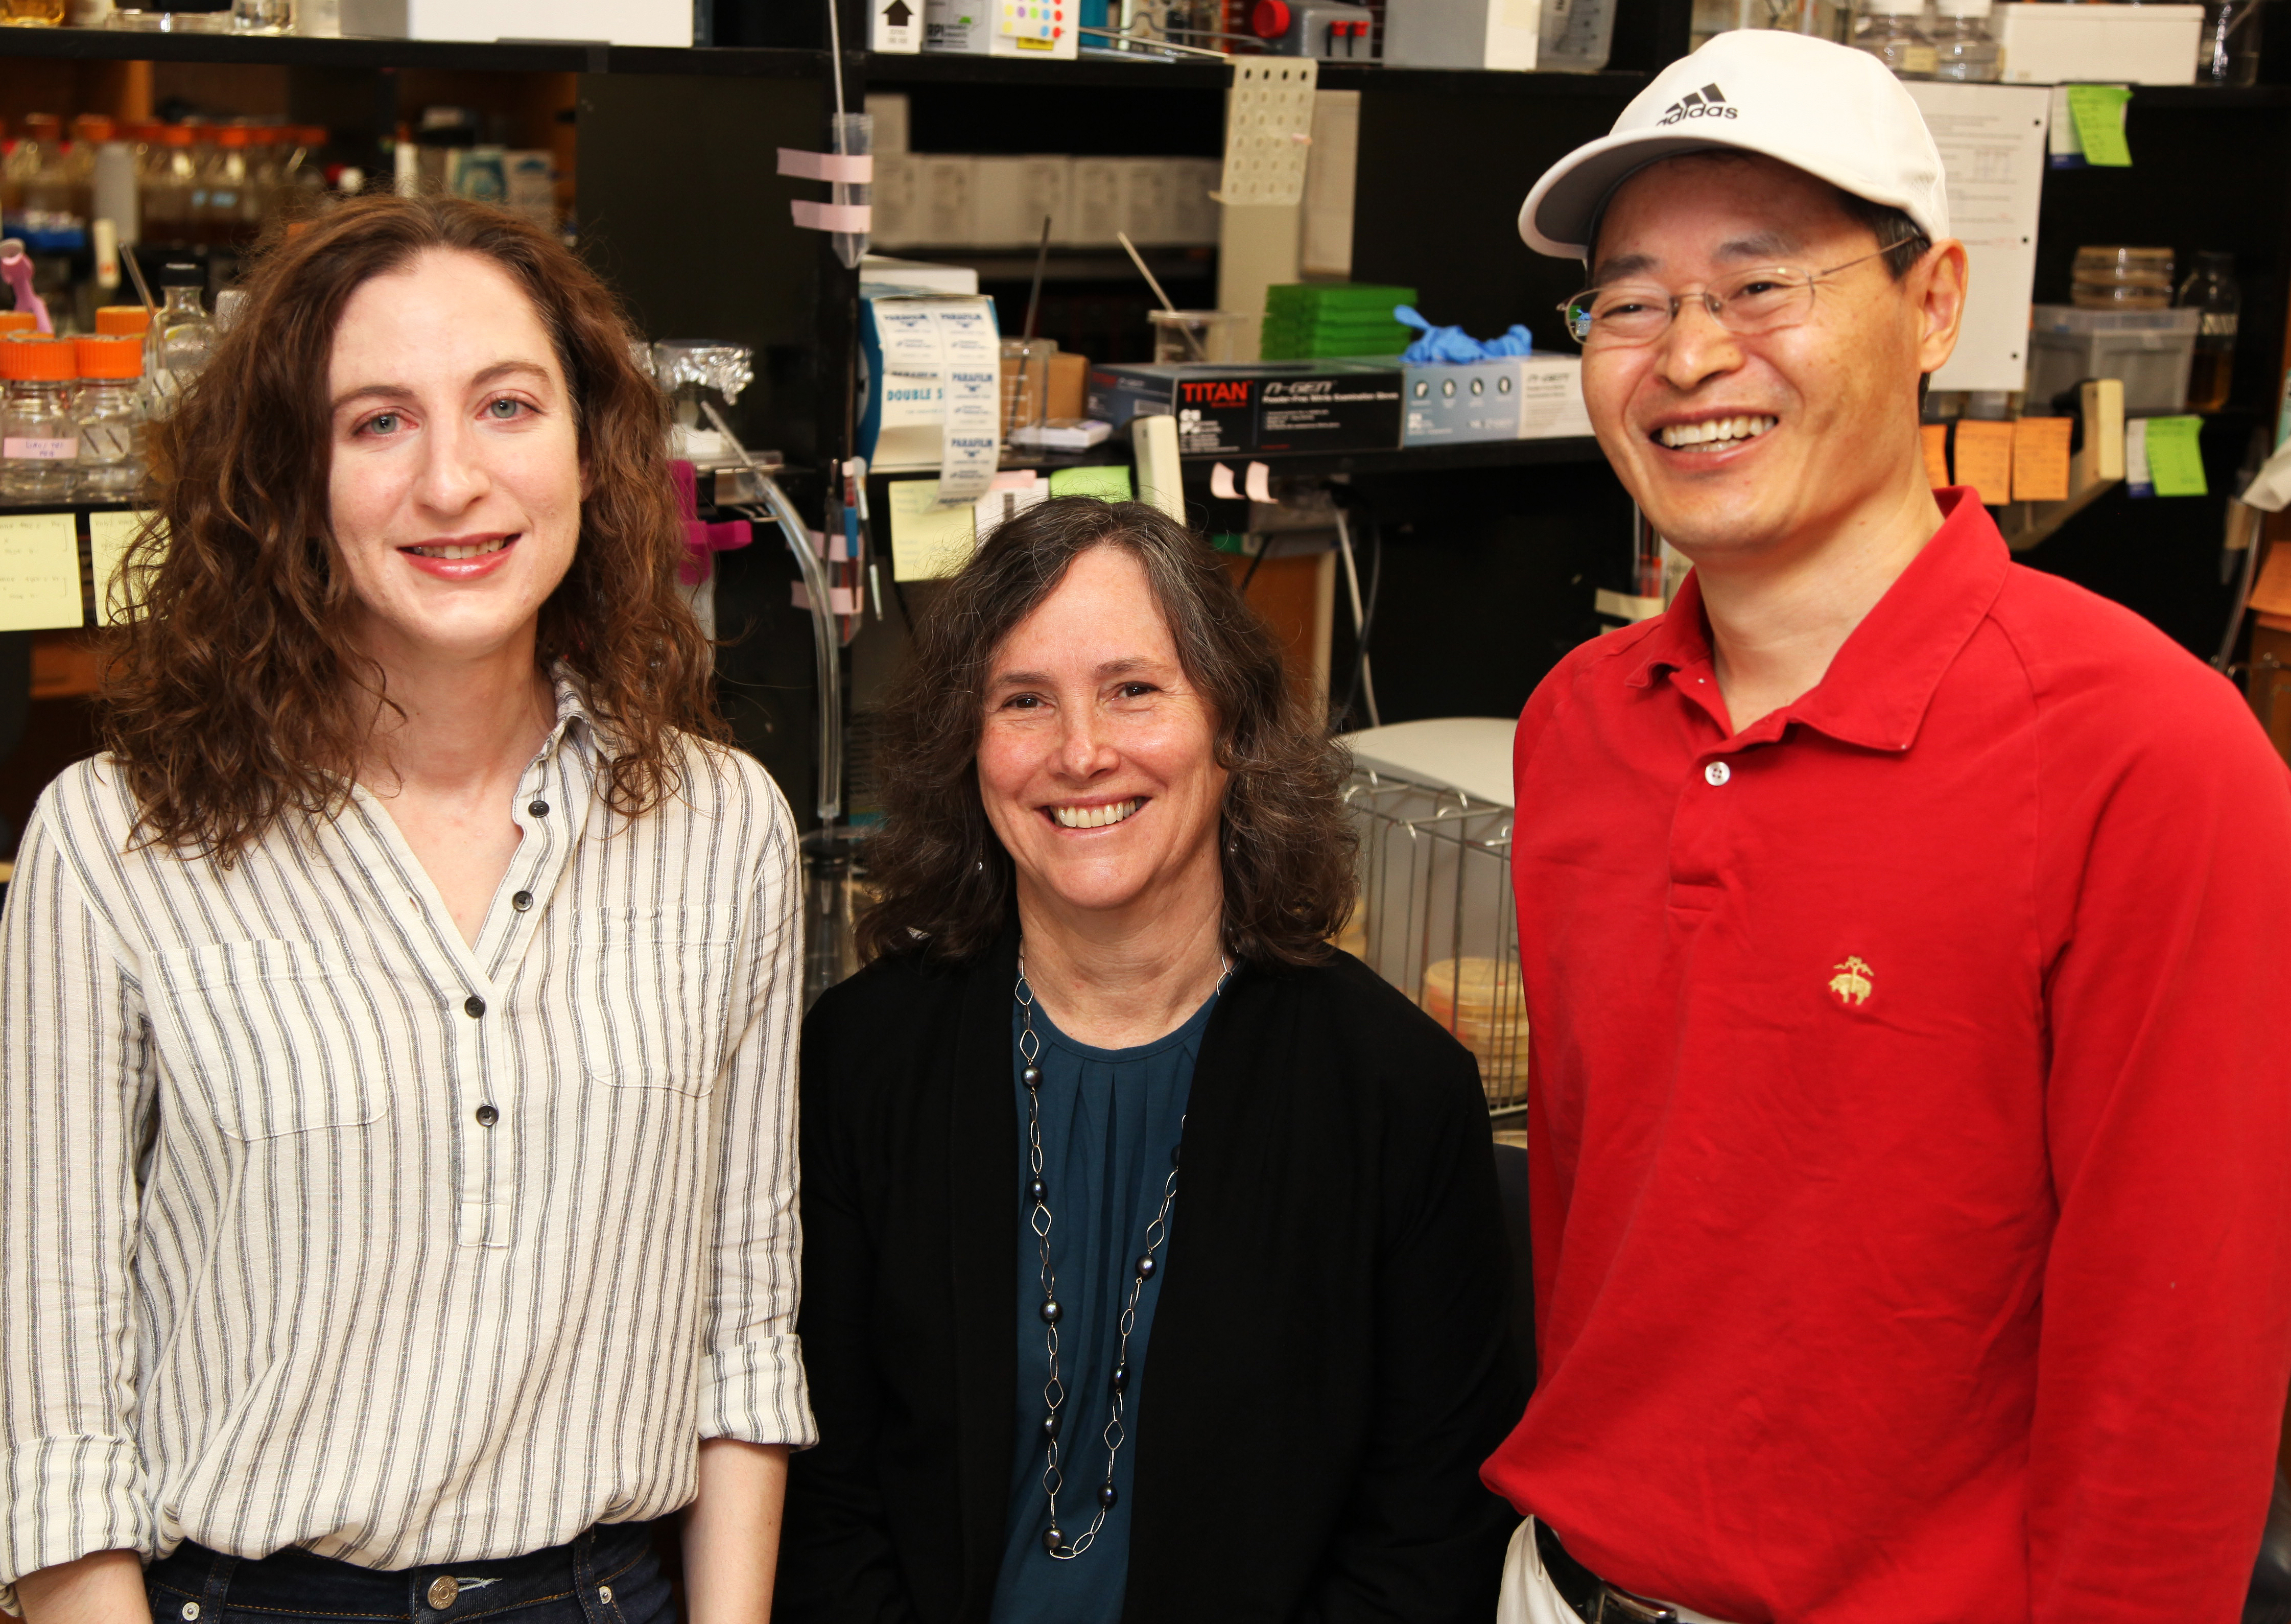 Photo of Sierra Cullati, Kathy Gould, and Jun-Song Chen in the Gould lab. Gould is sitting down, flanked by Cullati on the left and Chen on the right. Cullati is wearing a striped blouse, Gould a turquoise blouse and a black cardigan, and Chen a red, long-sleeved shirt and a baseball cap.